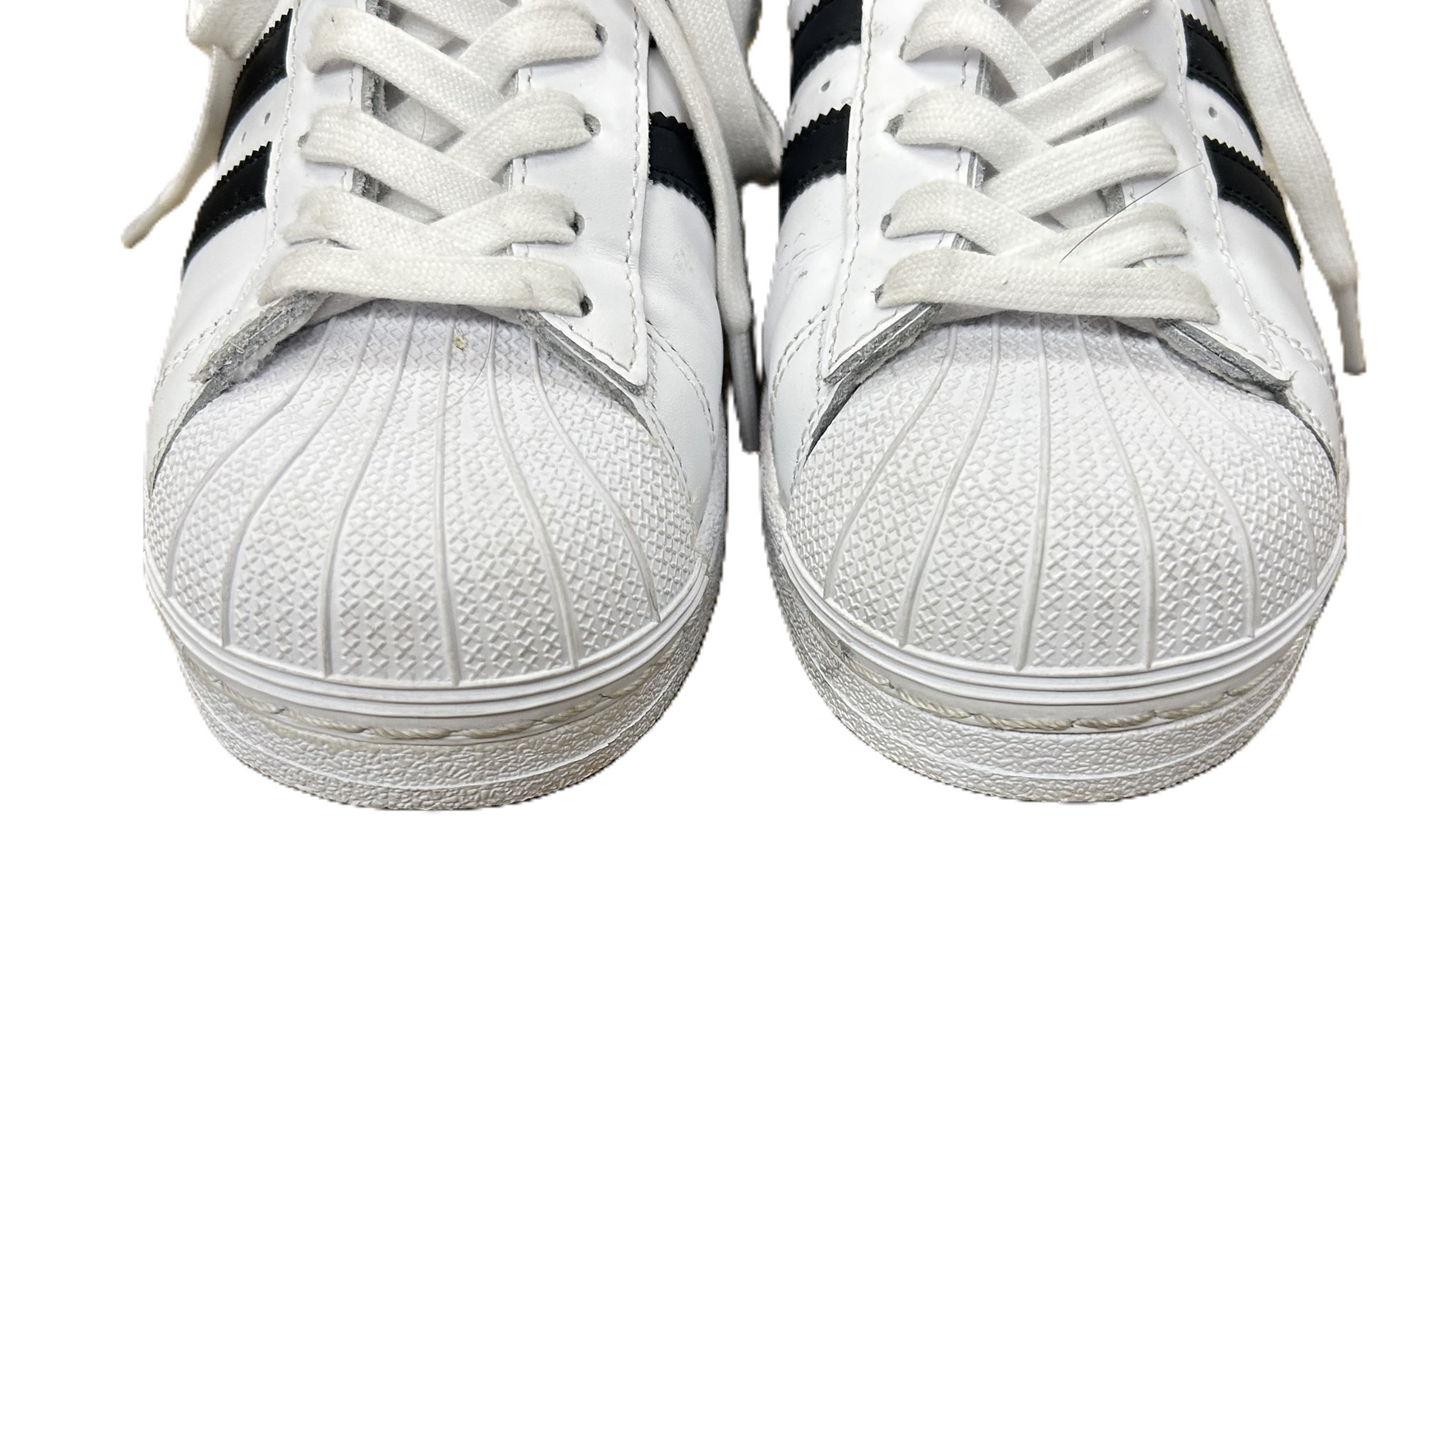 Black & White Shoes Sneakers By Adidas, Size: 7